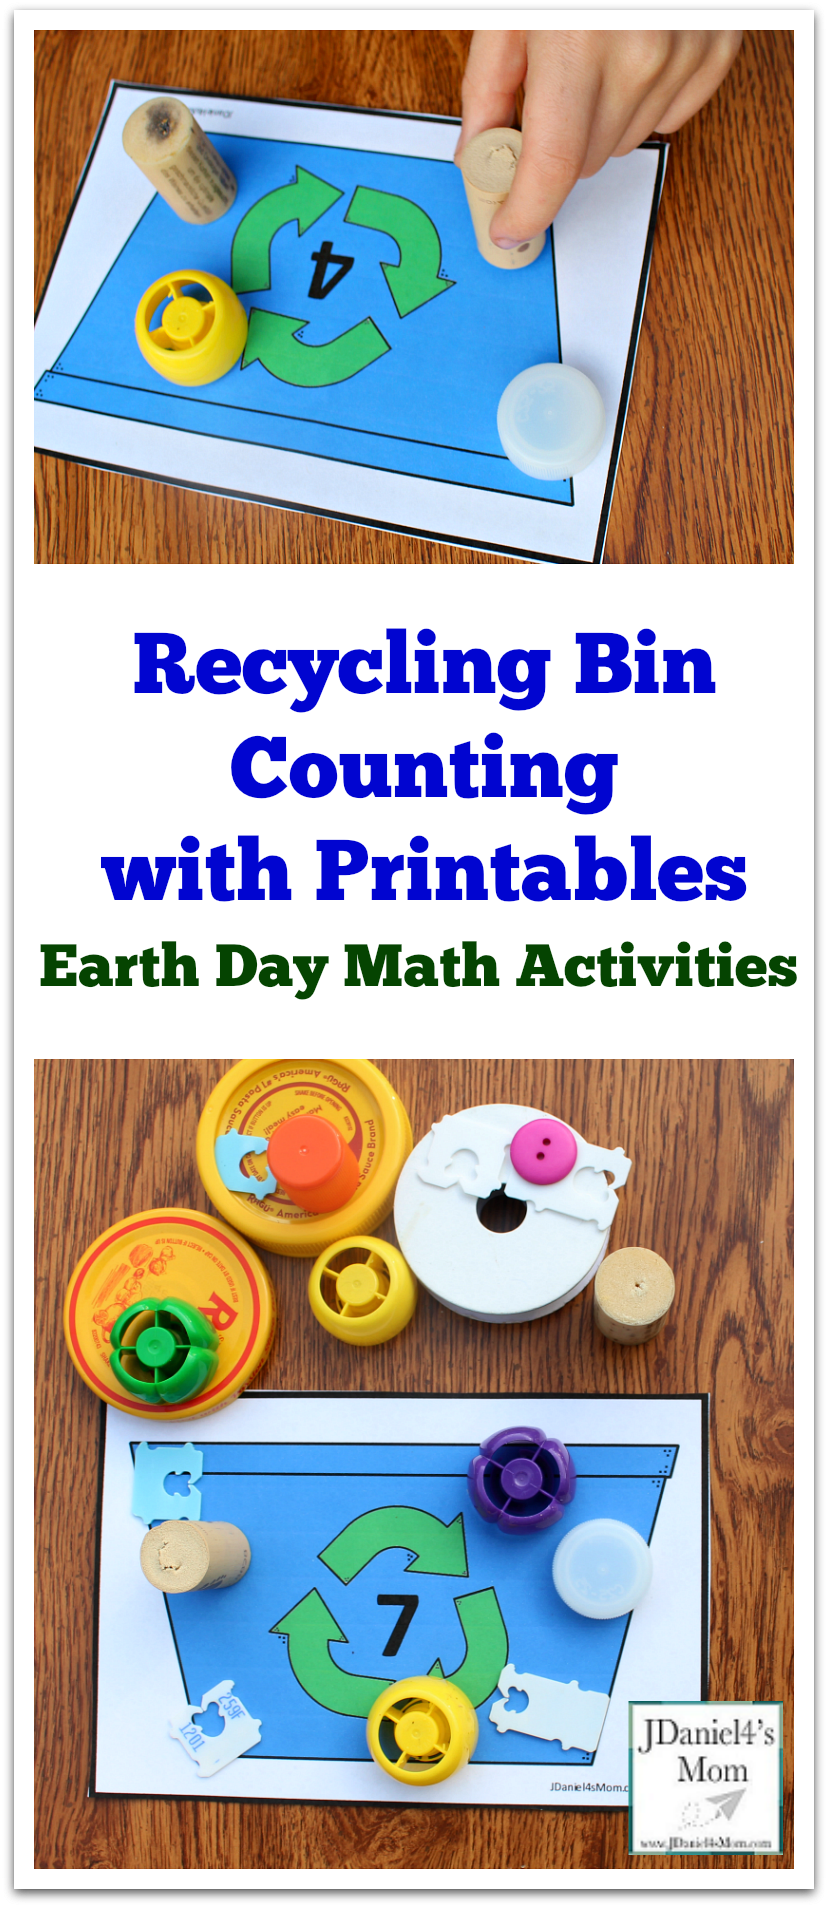 Earth Day Math Activities -Recycling Bin Counting with Printables : Kids will love exploring numbers with small counters.